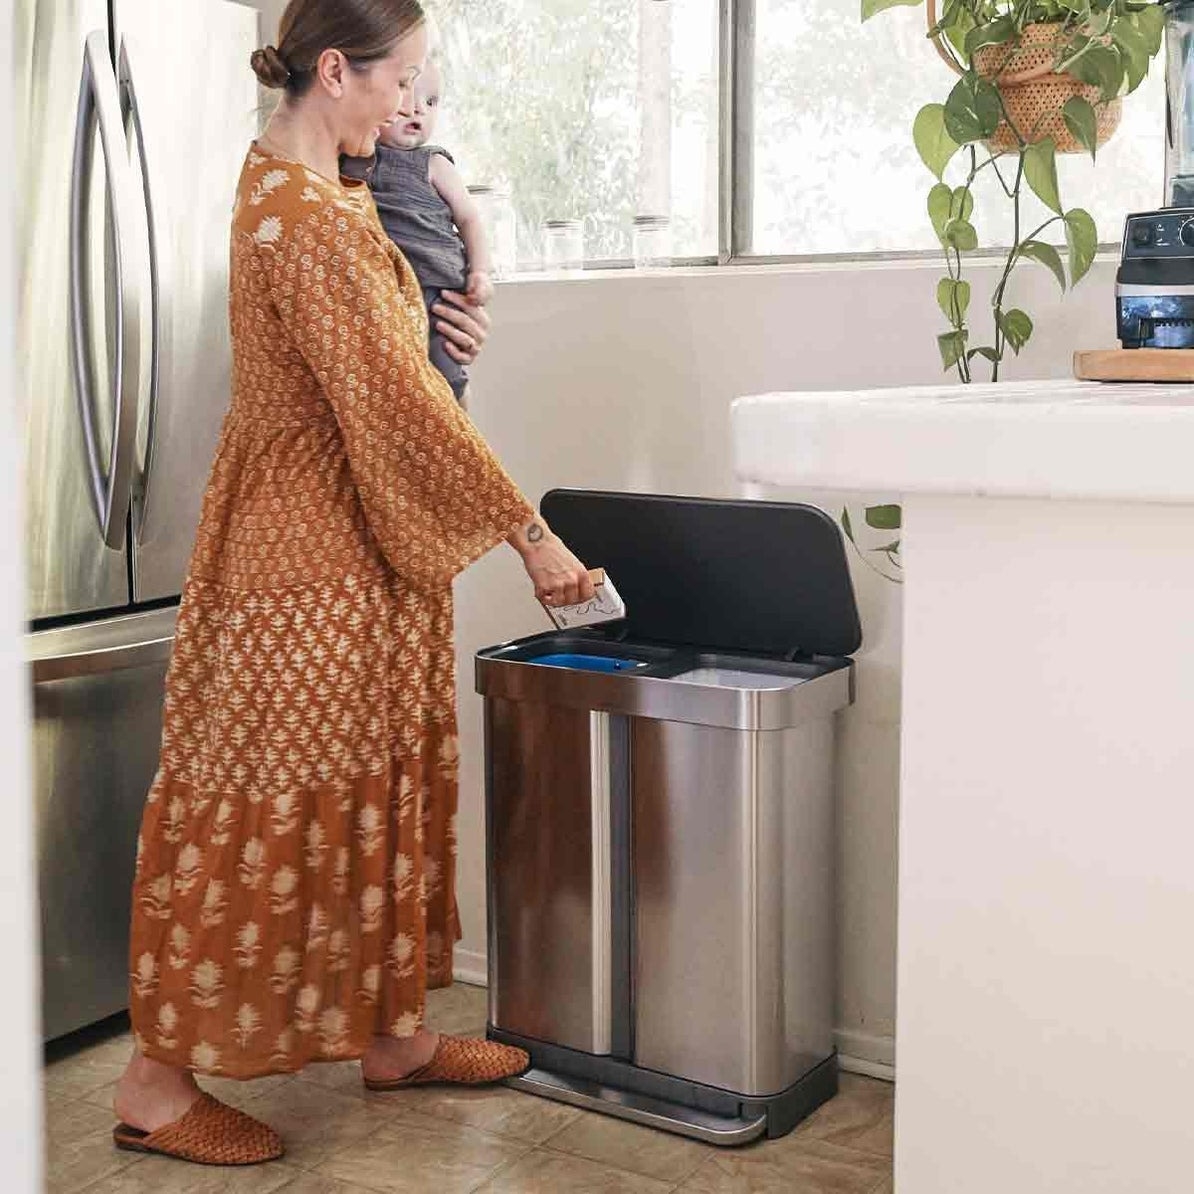 a stainless steel garbage can with two sections, one for recyclables and one for garbage